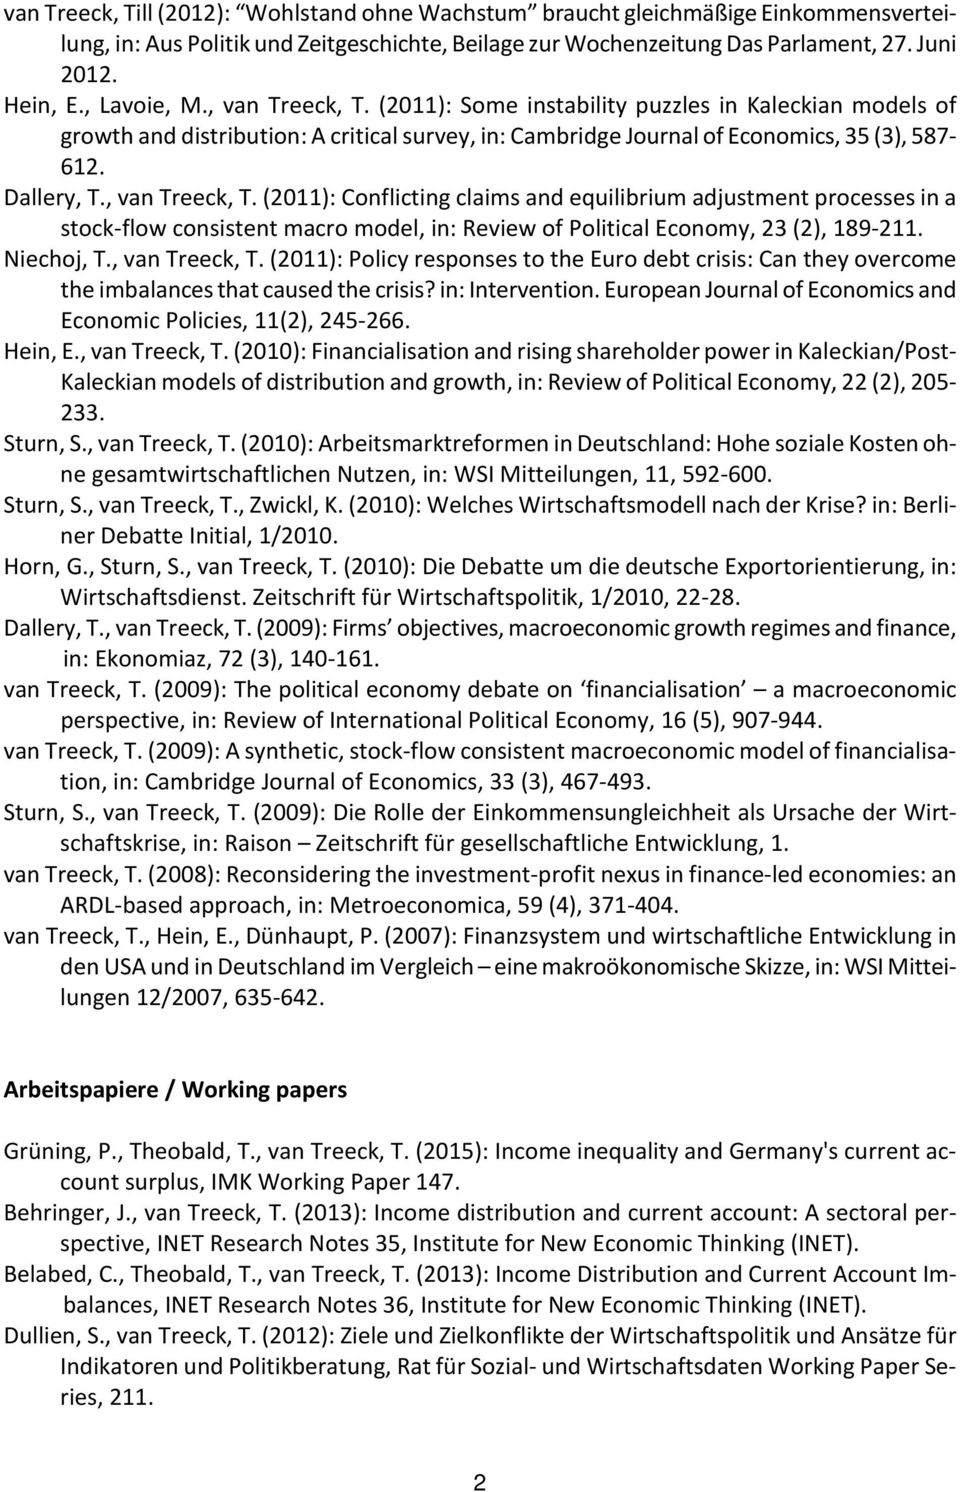 , van Treeck, T. (2011): Conflicting claims and equilibrium adjustment processes in a stock-flow consistent macro model, in: Review of Political Economy, 23 (2), 189-211. Niechoj, T., van Treeck, T. (2011): Policy responses to the Euro debt crisis: Can they overcome the imbalances that caused the crisis?